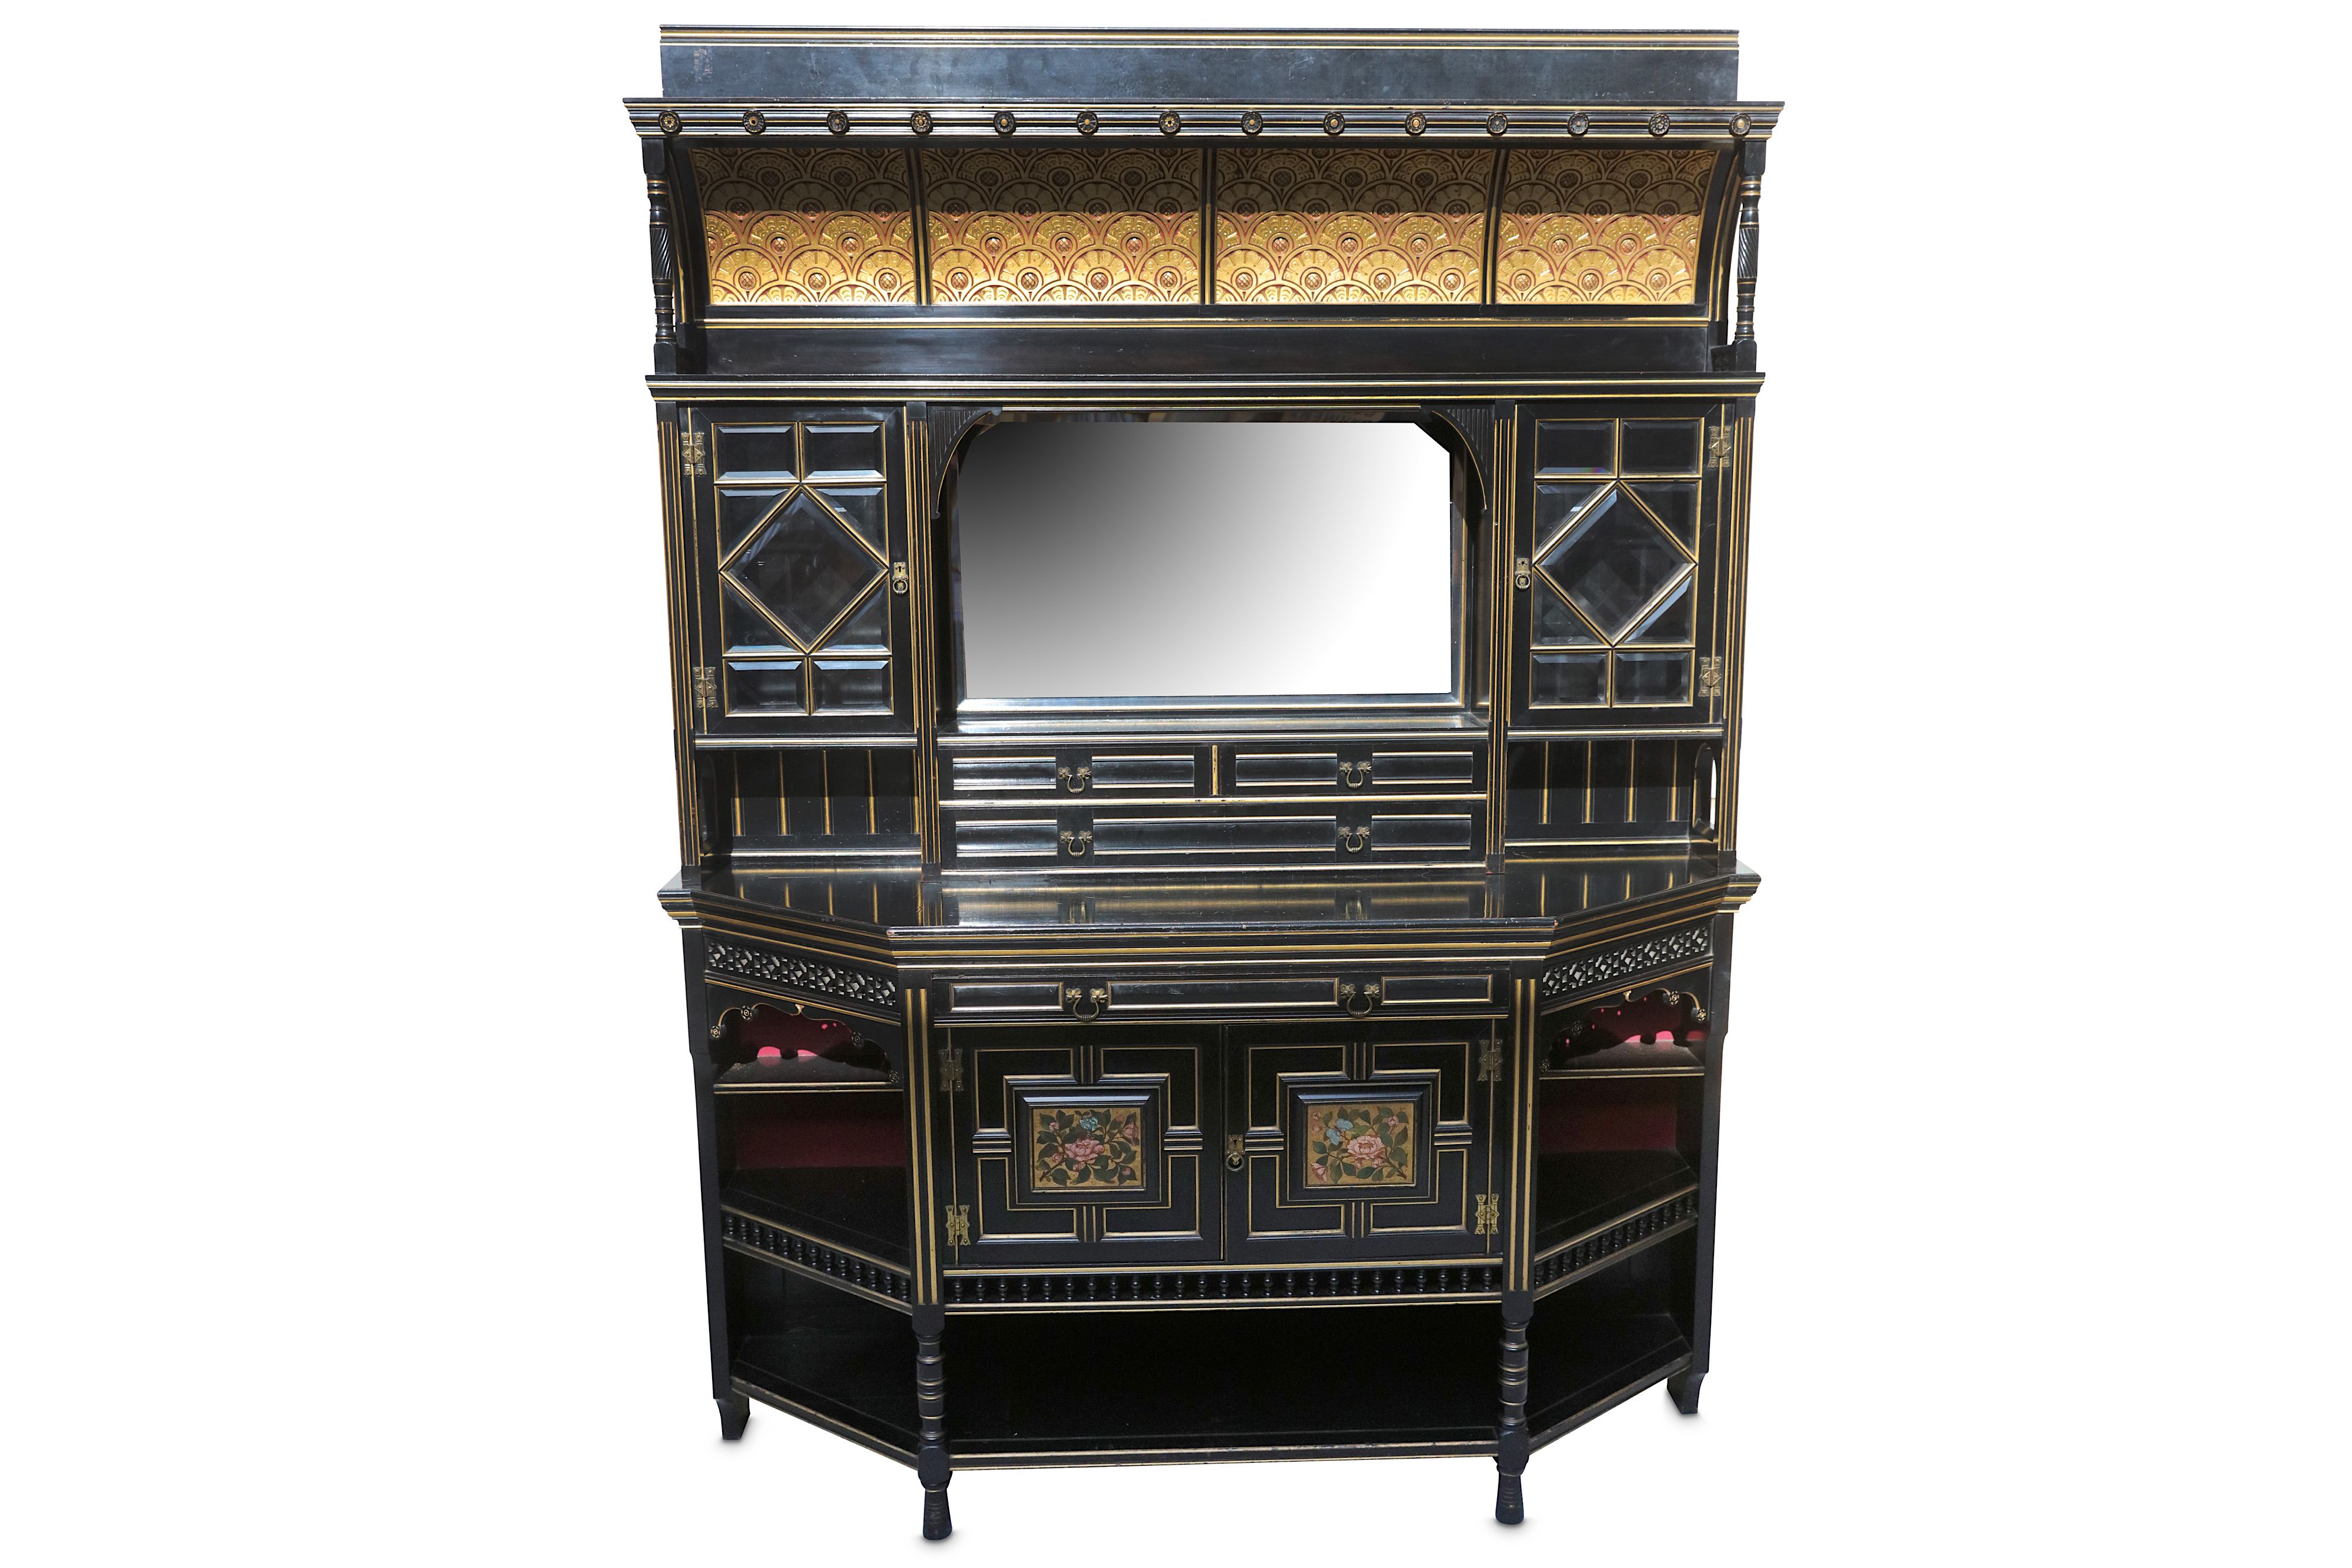 ATTRIBUTED TO BRUCE TALBERT: An Aesthetic Movement cabinet c.1870